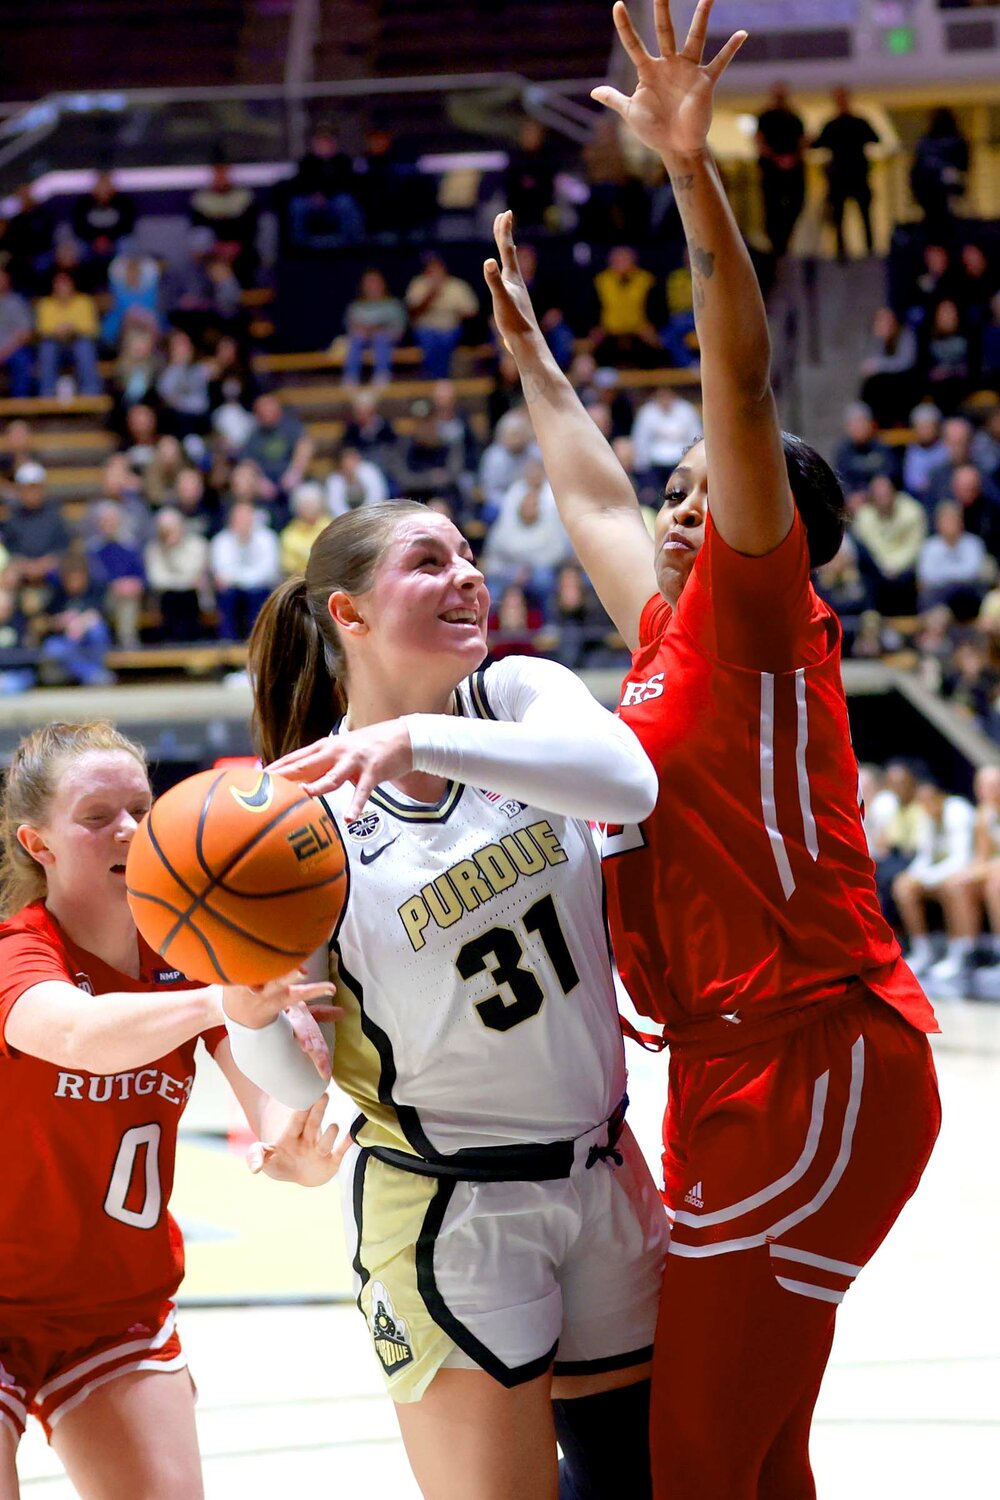 Sophie Swanson of Purdue - being fouled on lay-up by Kassondra Brown of Rutgers